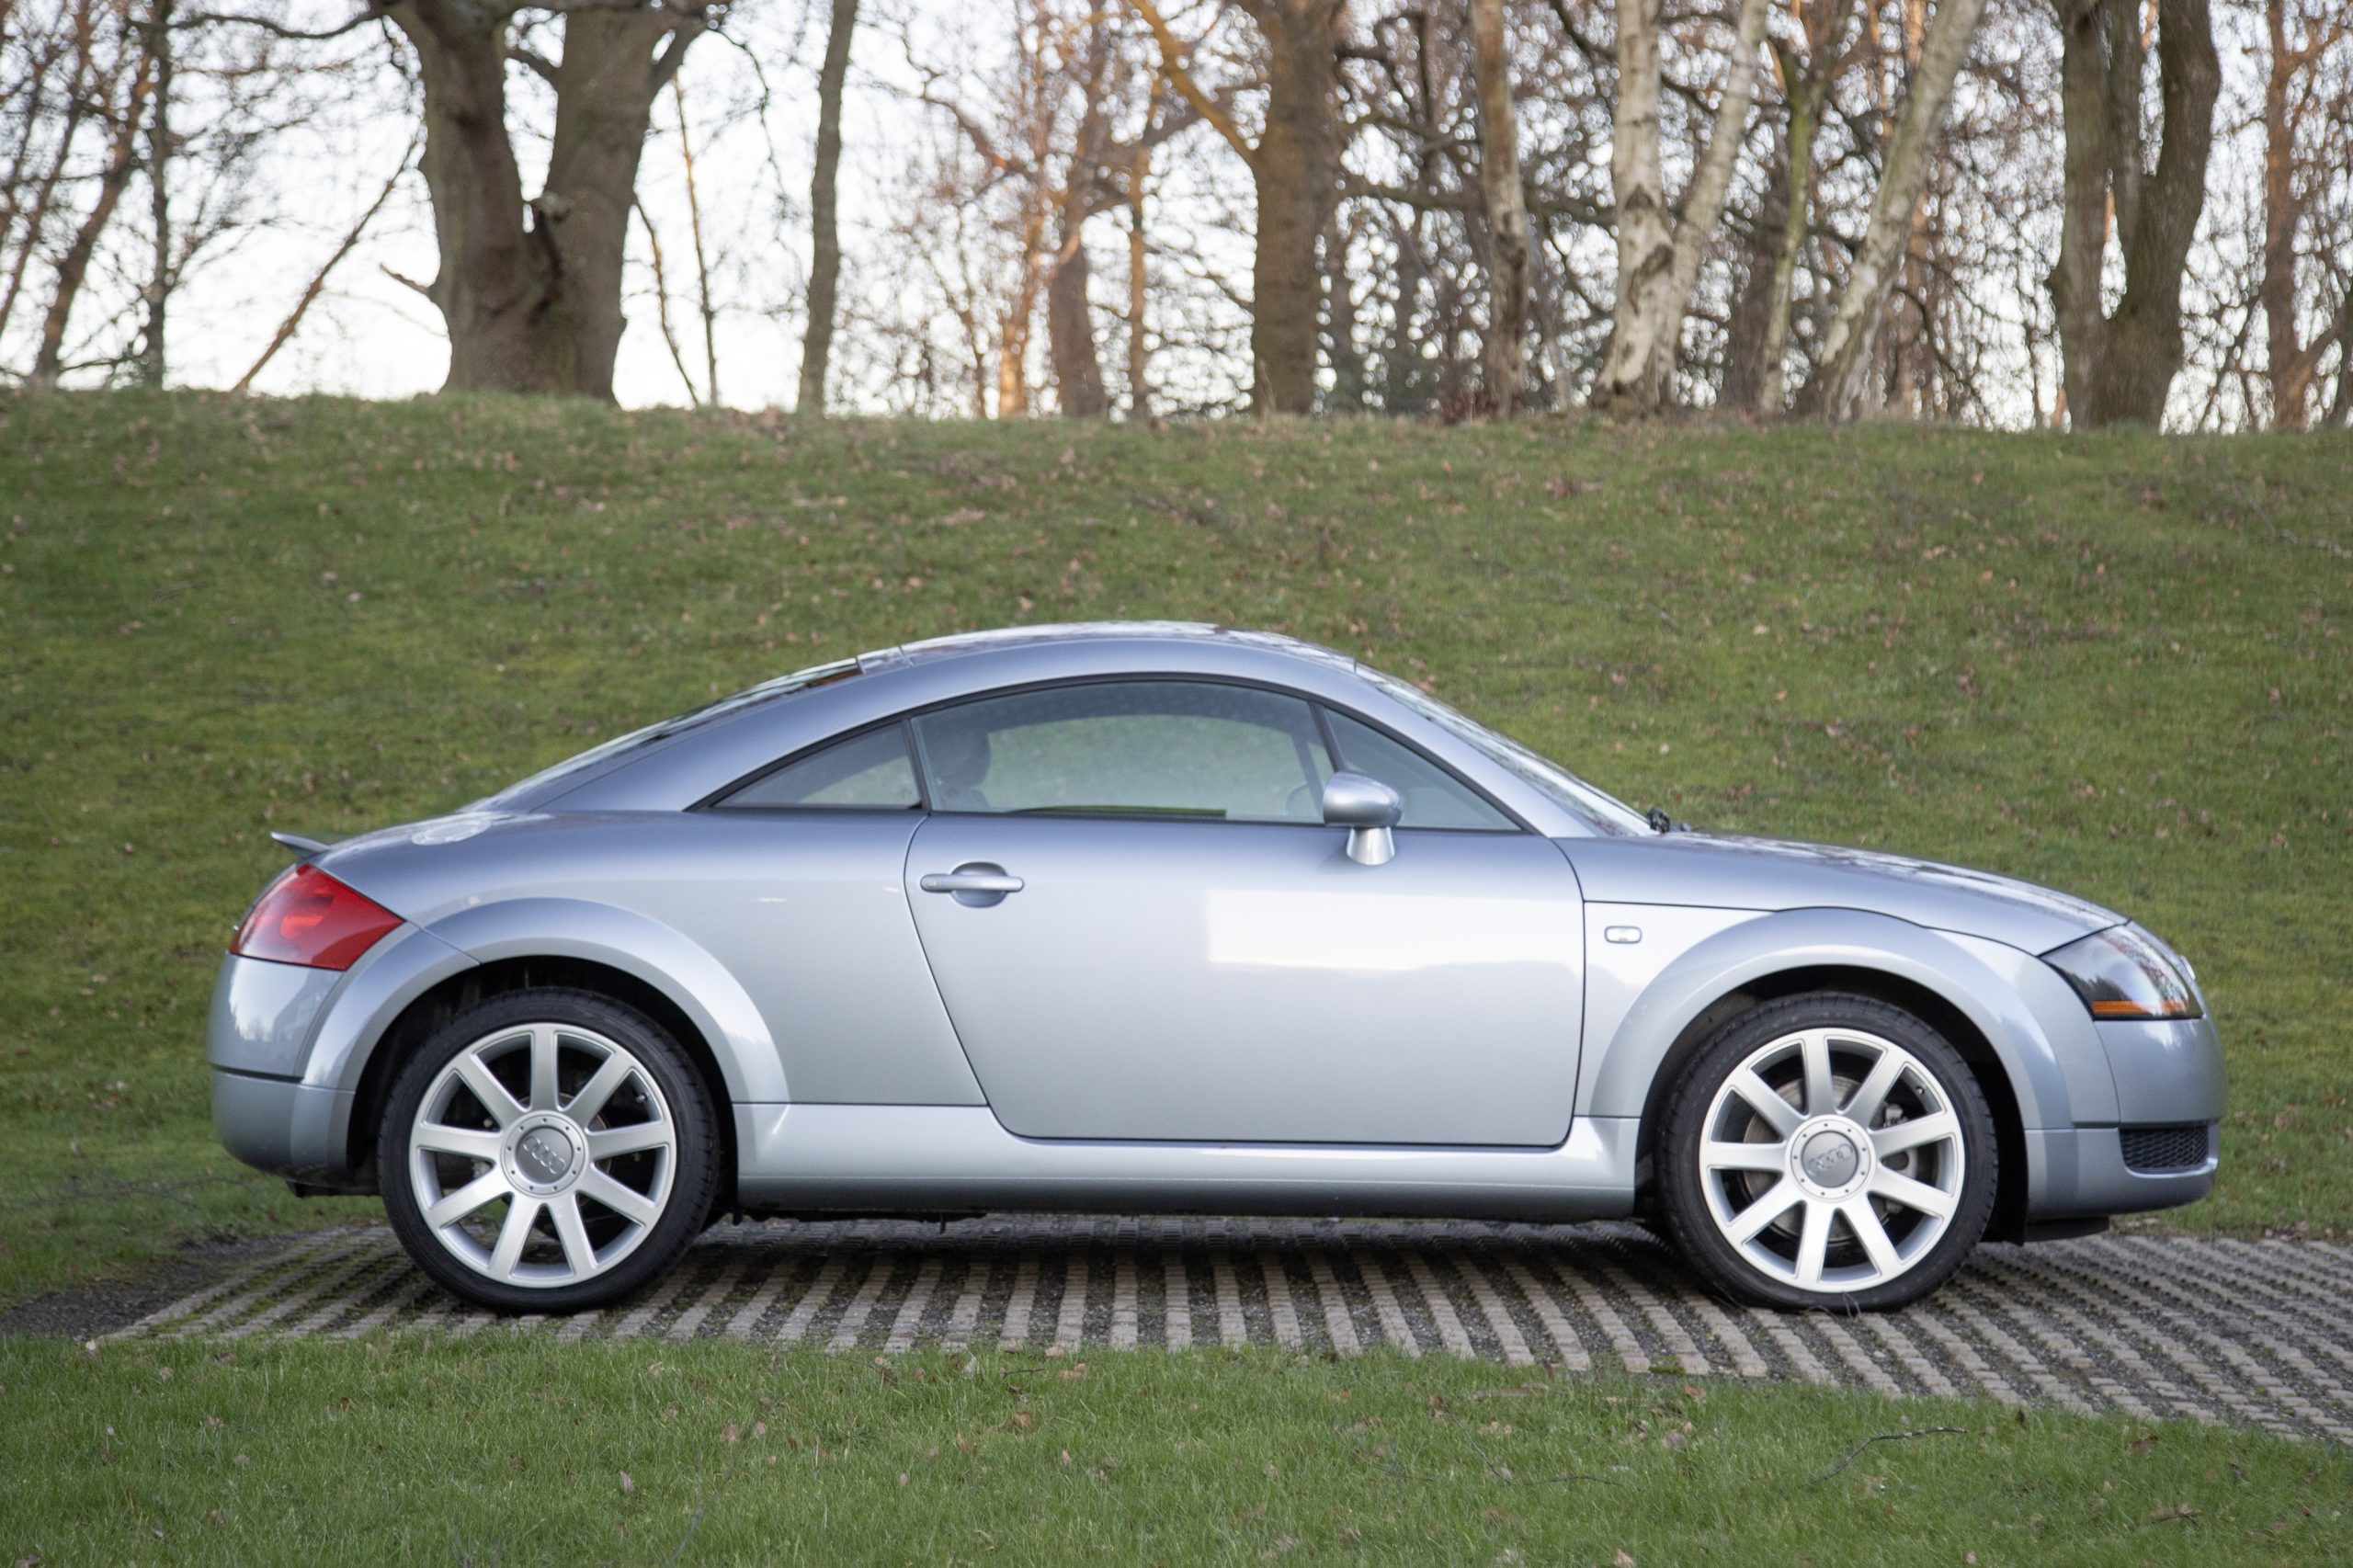 Say hello and wave goodbye with this 535-mile Audi TT Mk1